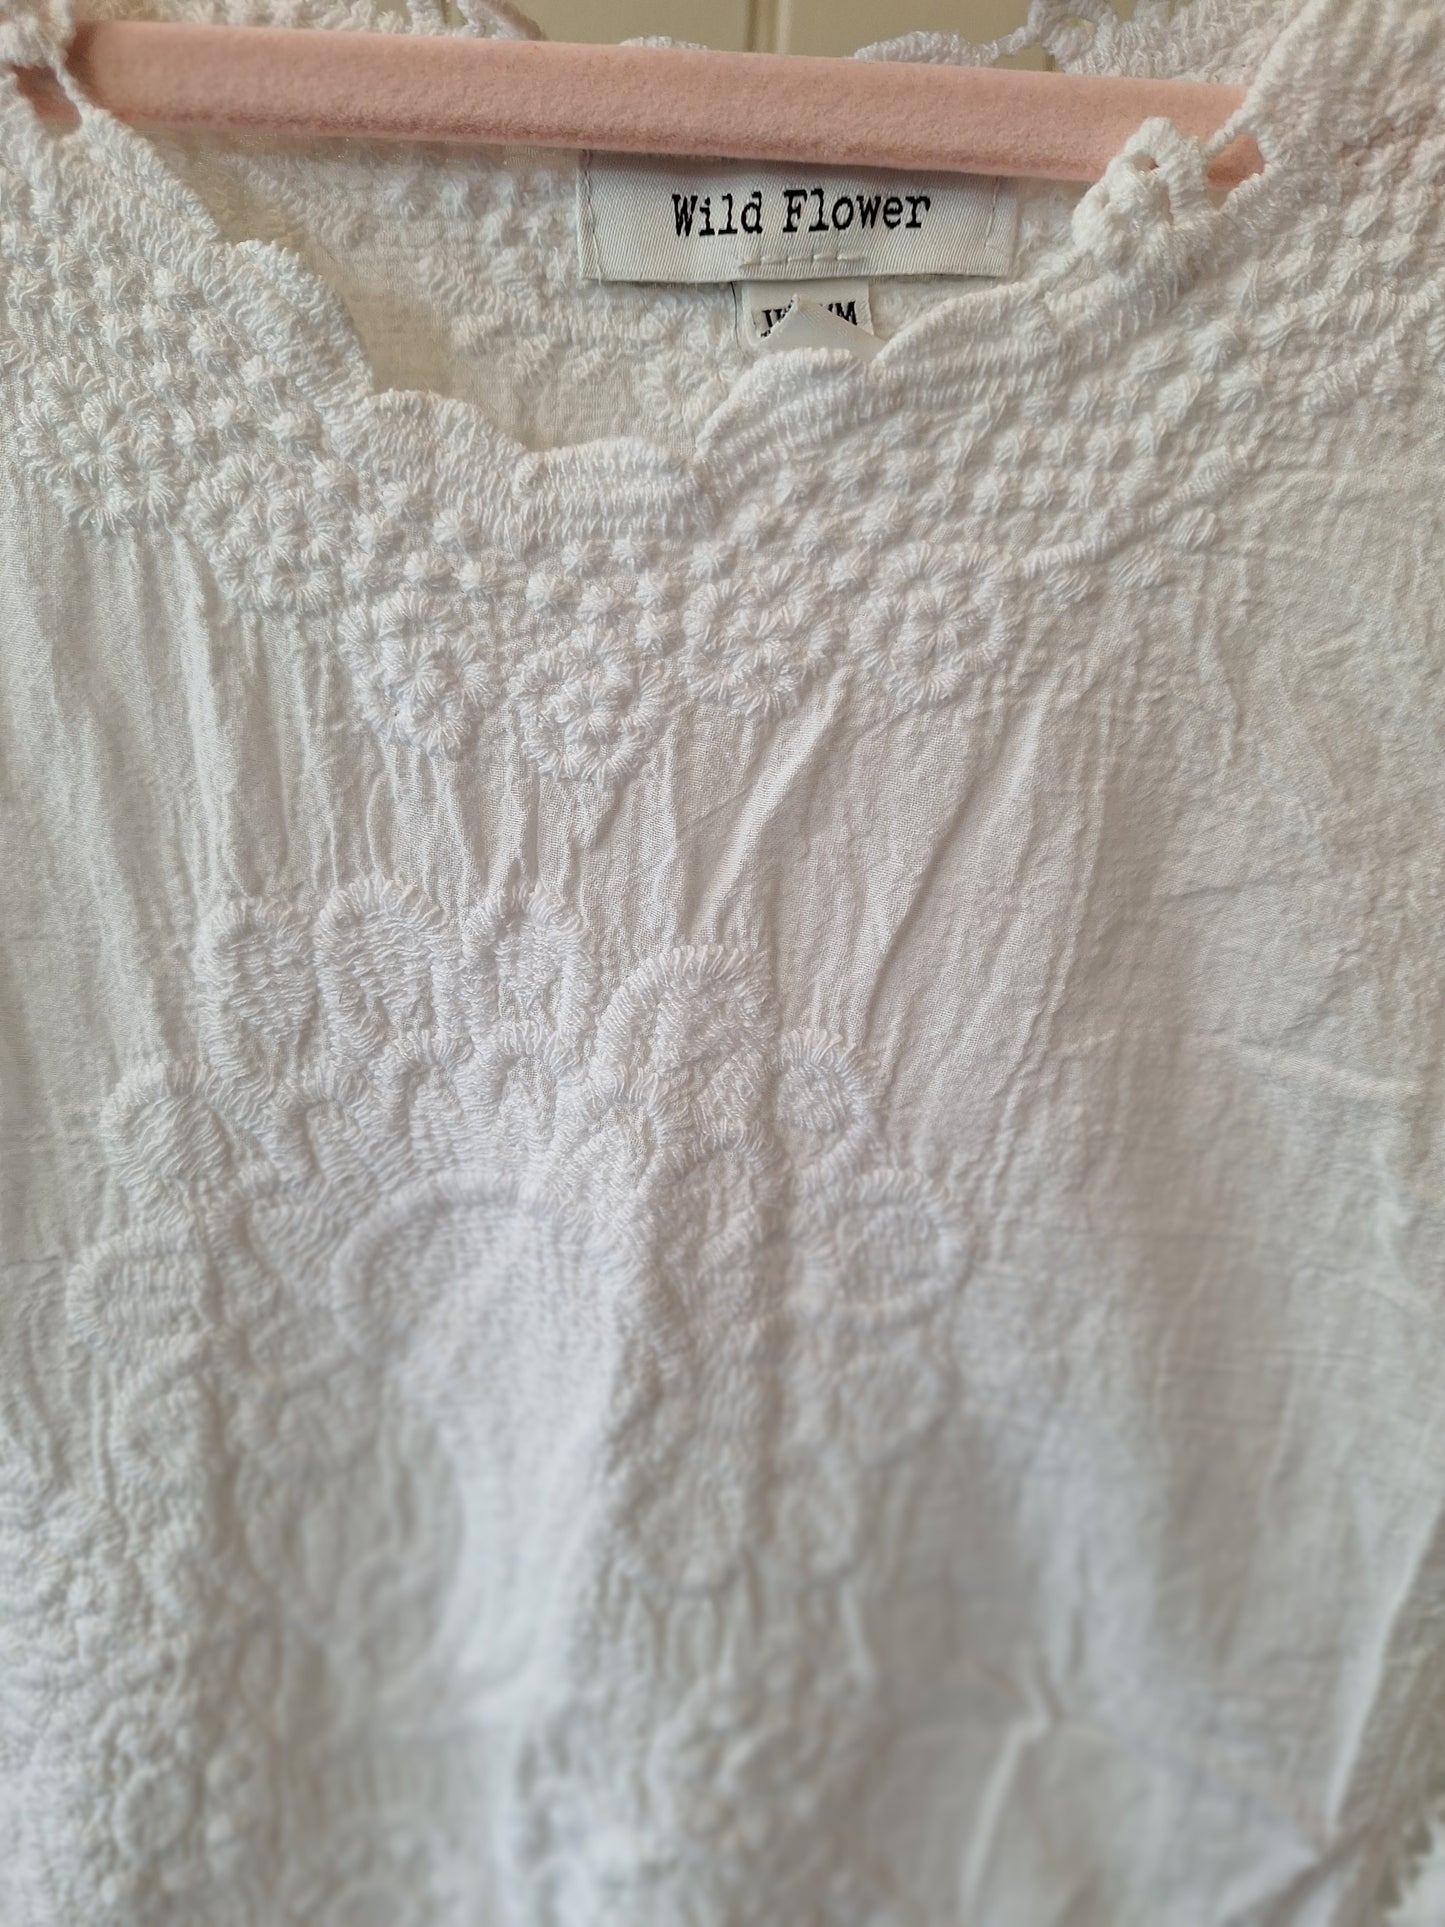 Wildflower white lace and crochet top S/M